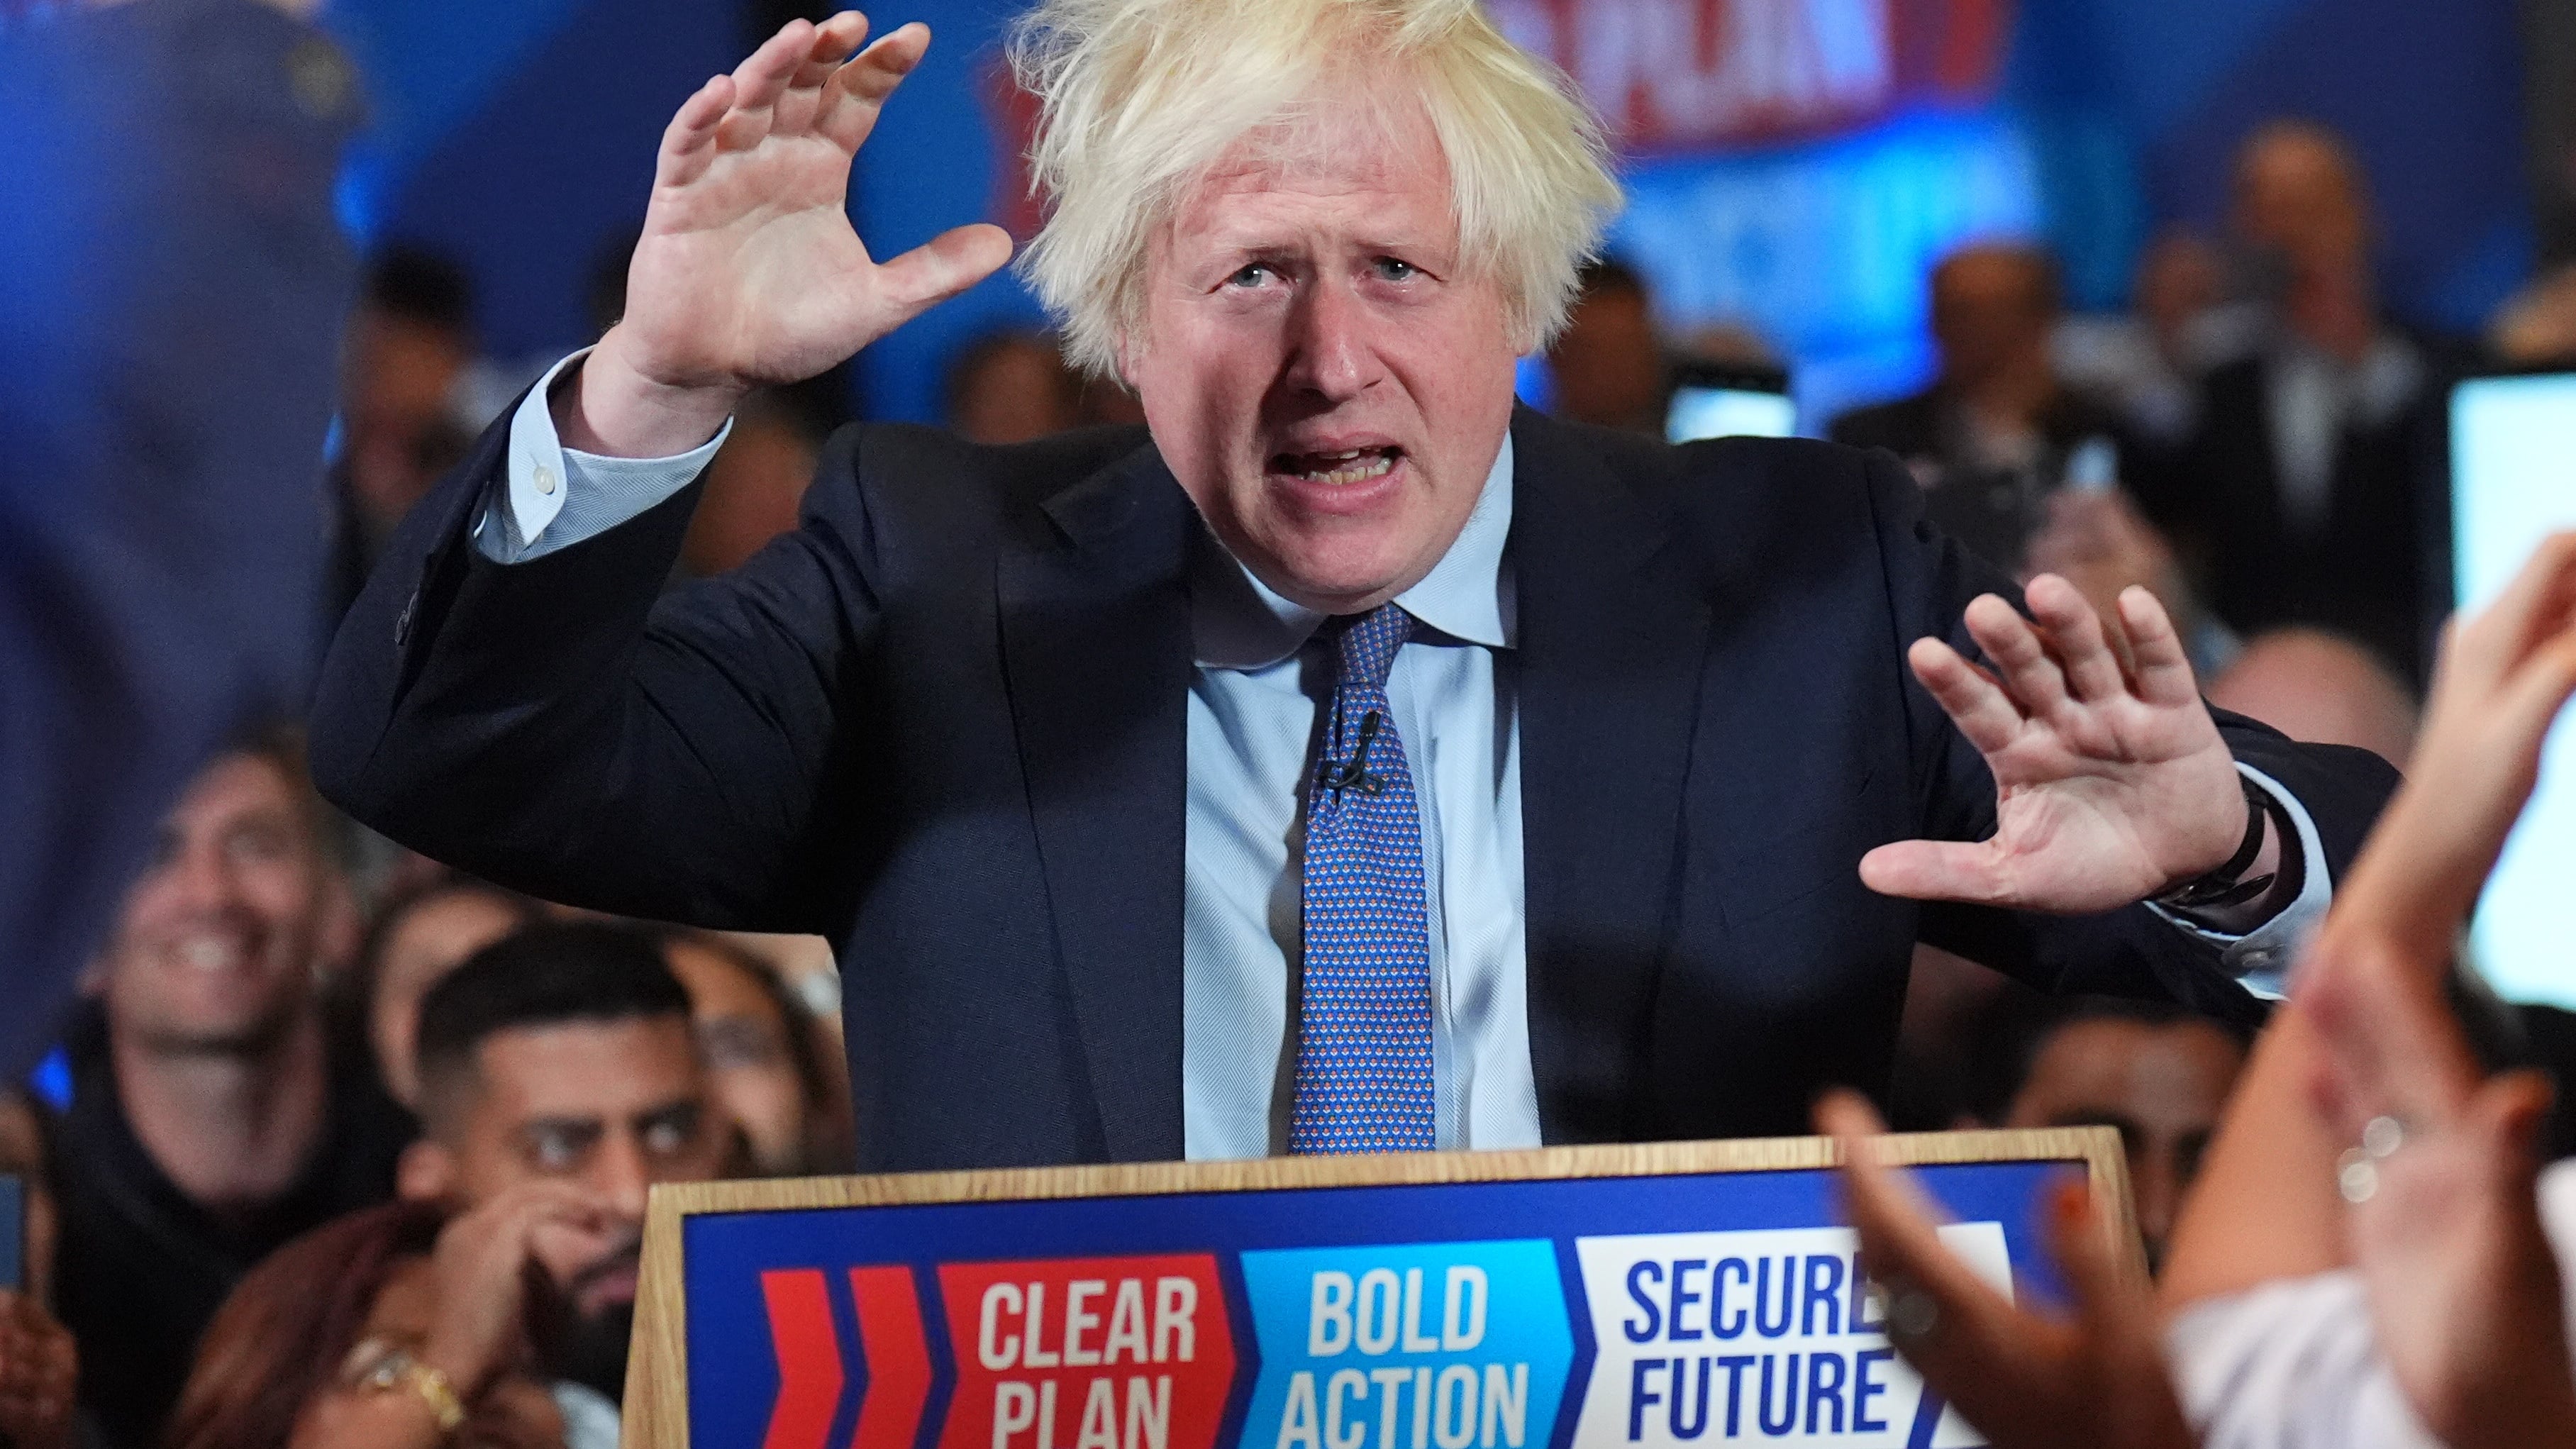 Boris Johnson joined the Conservative Party on the campaign trail just over 48 hours before General Election polls close